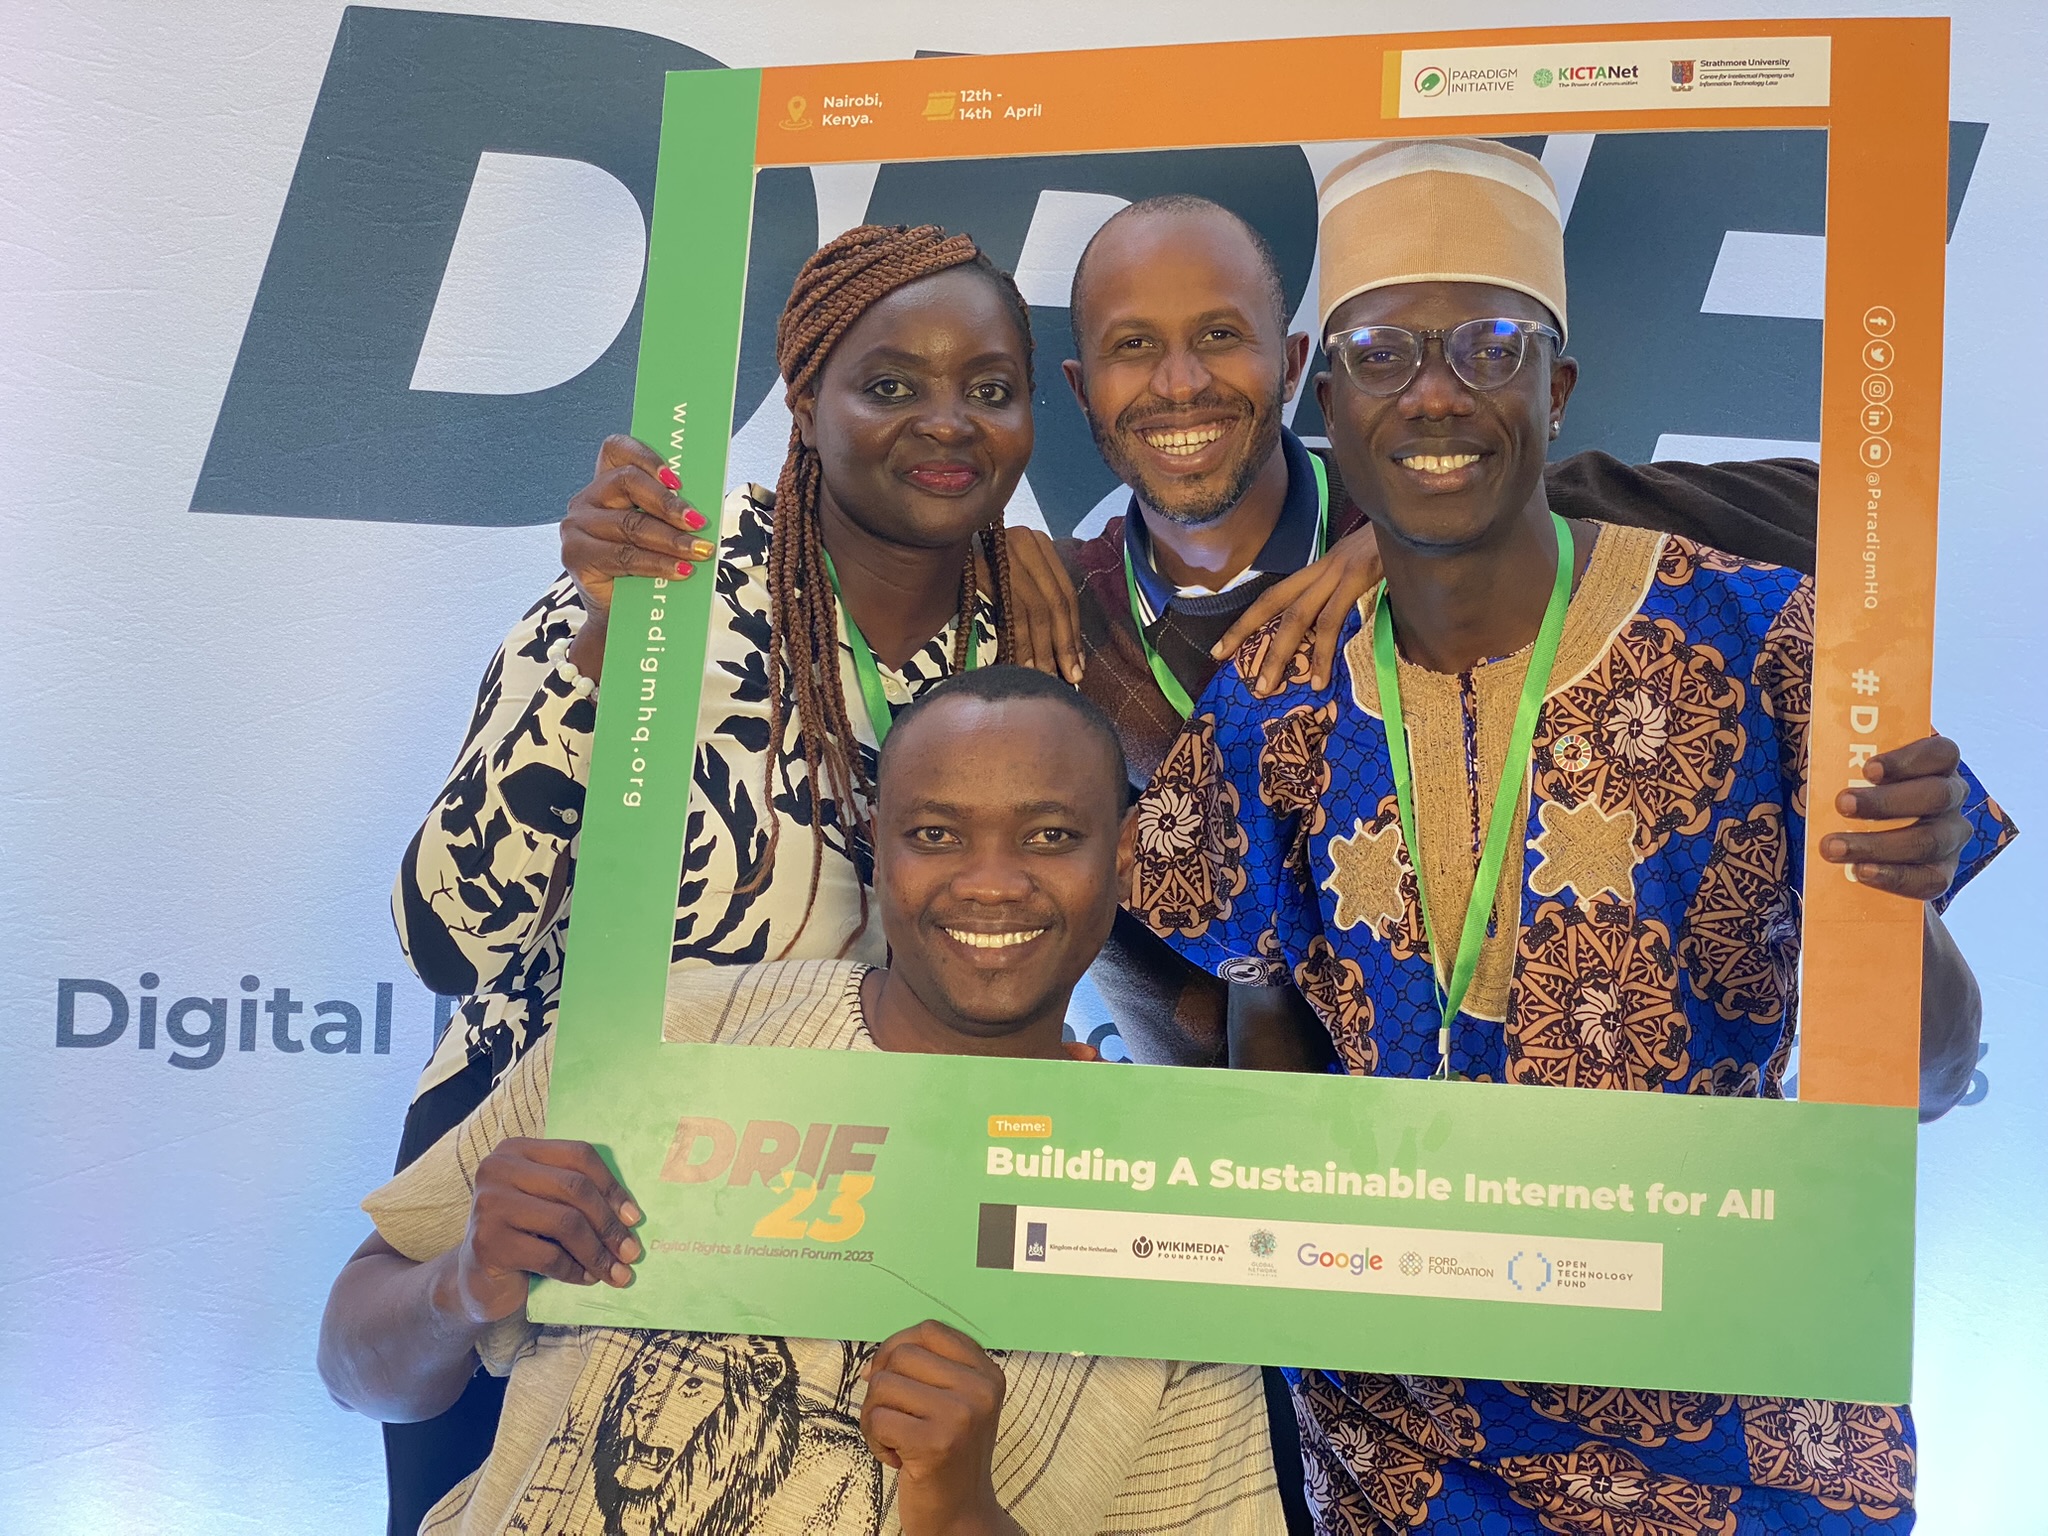 Group photo of Damilare Oyedele and other participants at the Digital Rights and Information Forum